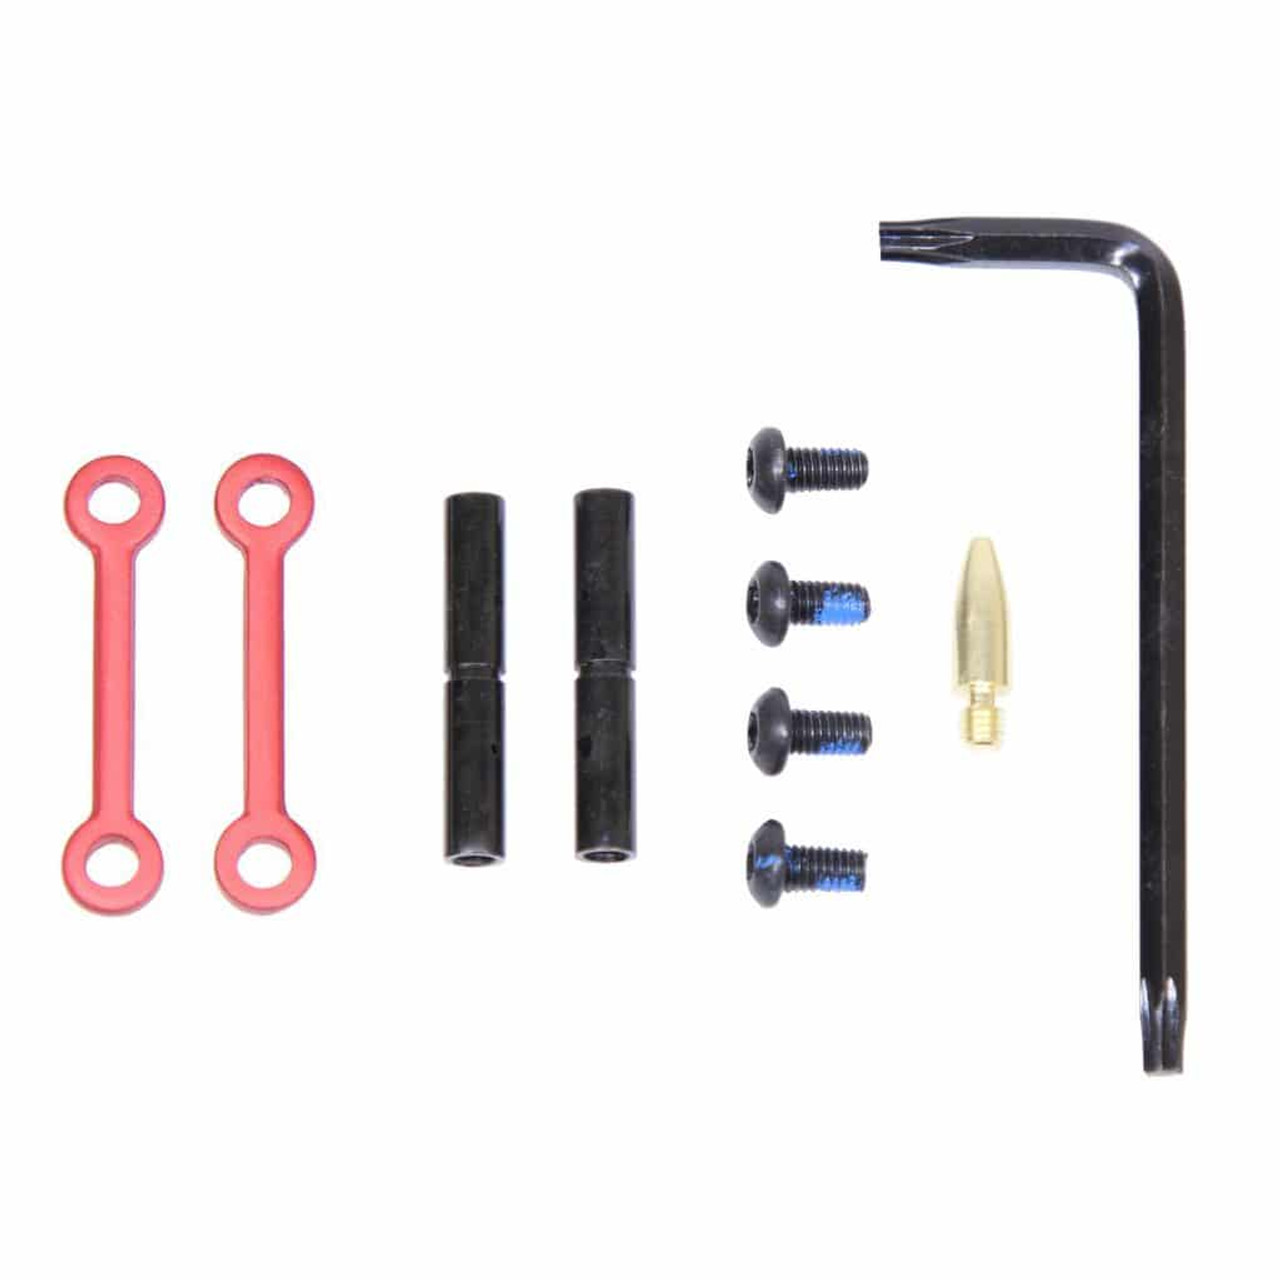 Guntec USA GT-ARP-RED Complete Anti-Rotation Trigger/Hammer Pin Set (Anodized Red)